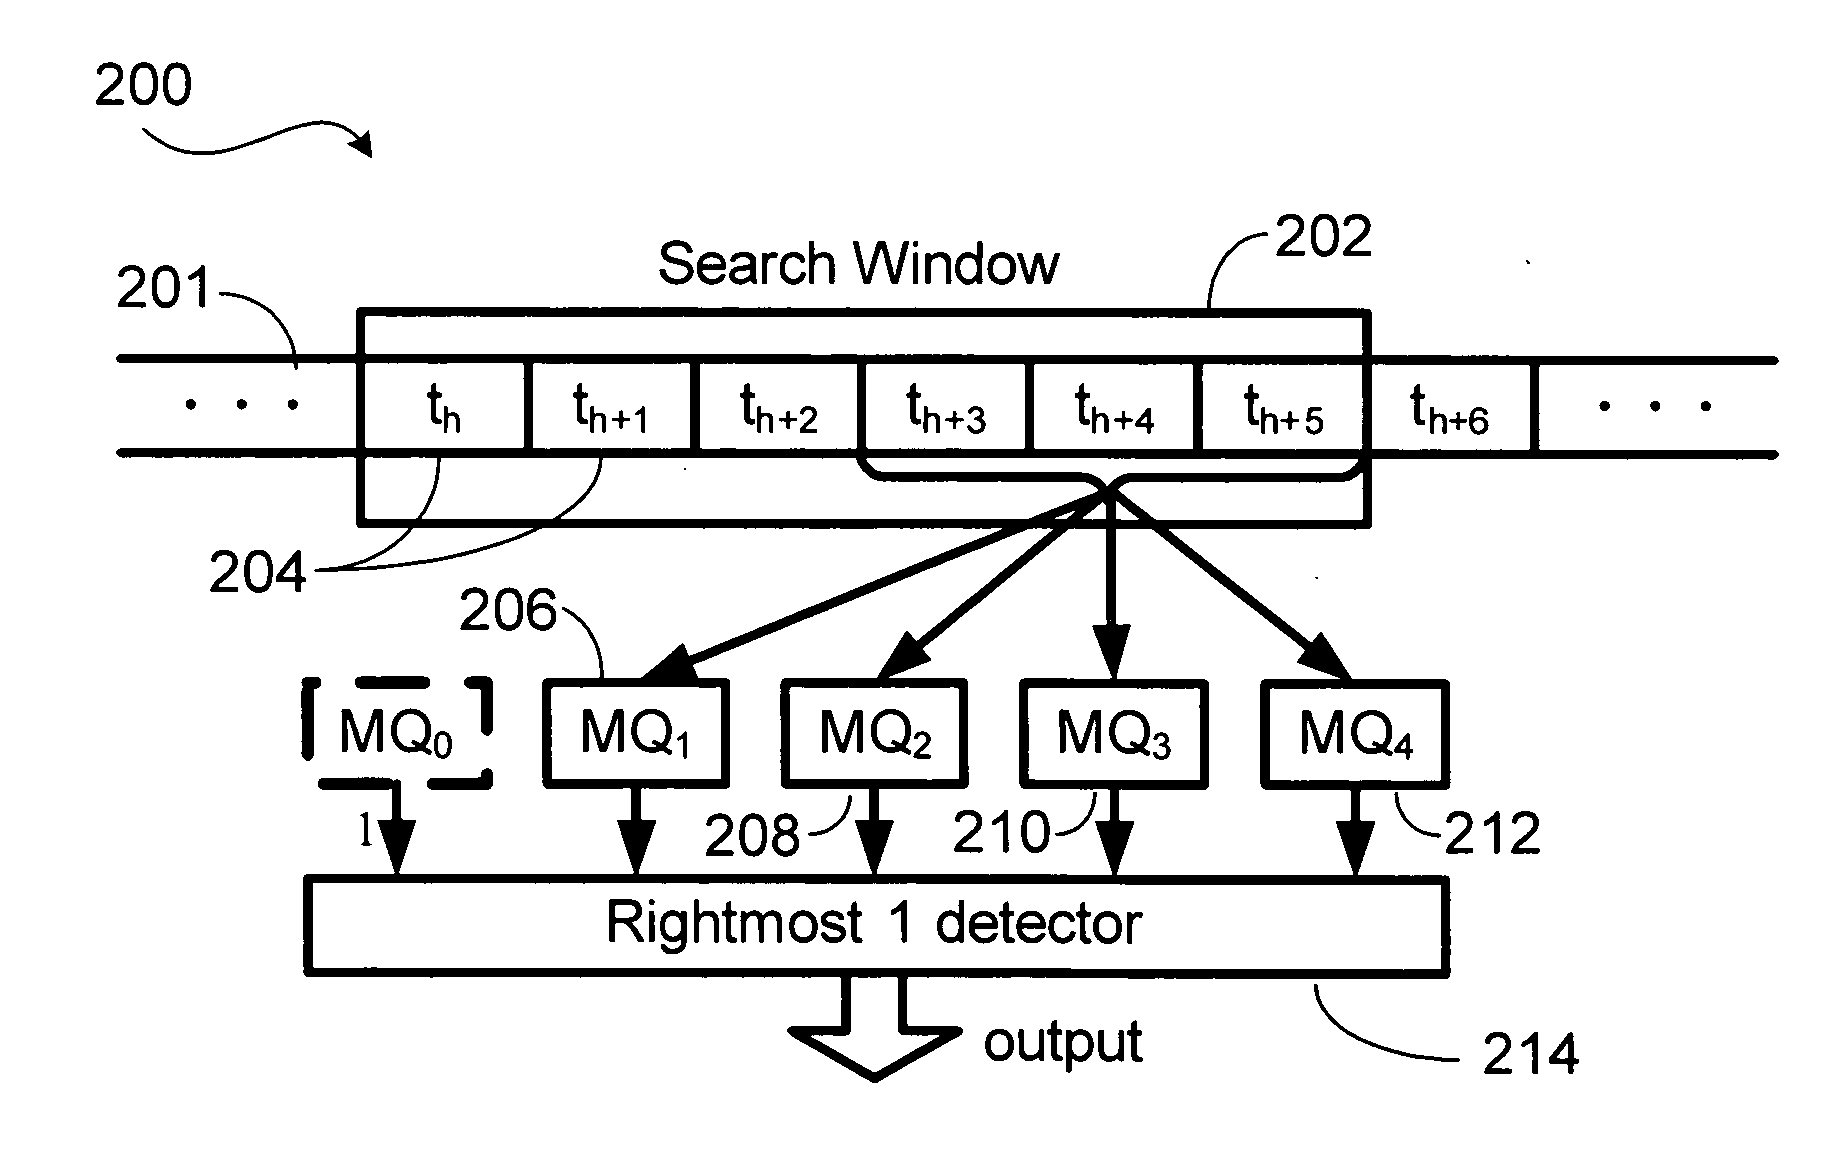 Apparatus and method for efficient data pre-filtering in a data stream